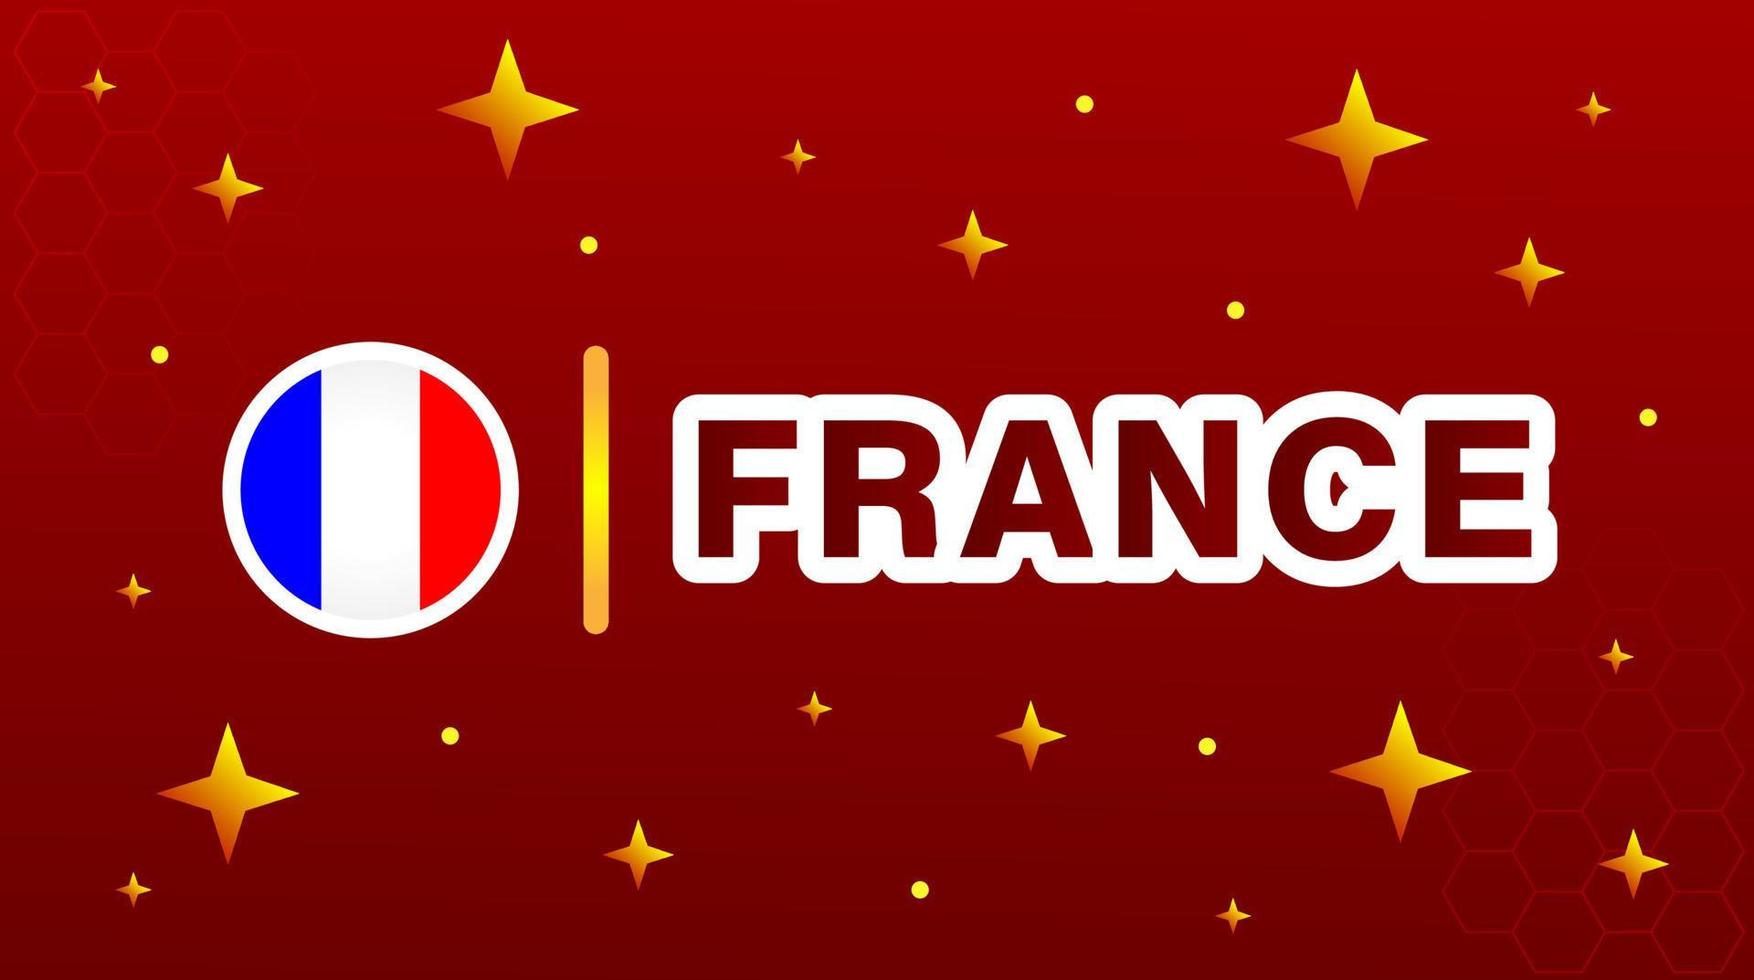 France flag with stars on red maroon background. vector